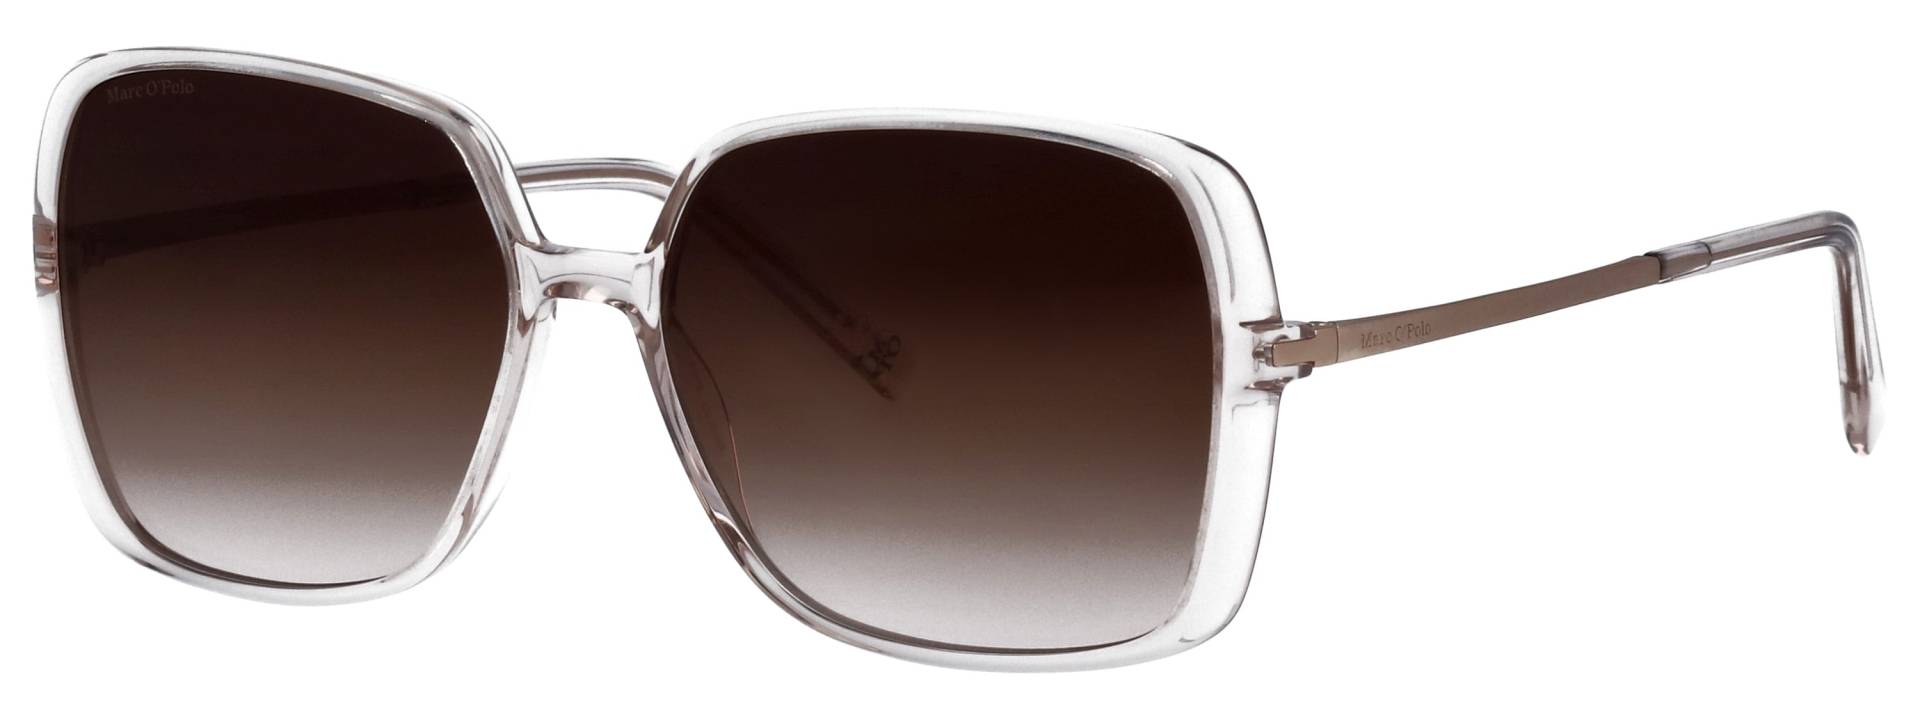 Marc O'Polo Sonnenbrille »Modell 506190«, Karree-From von Marc O'Polo